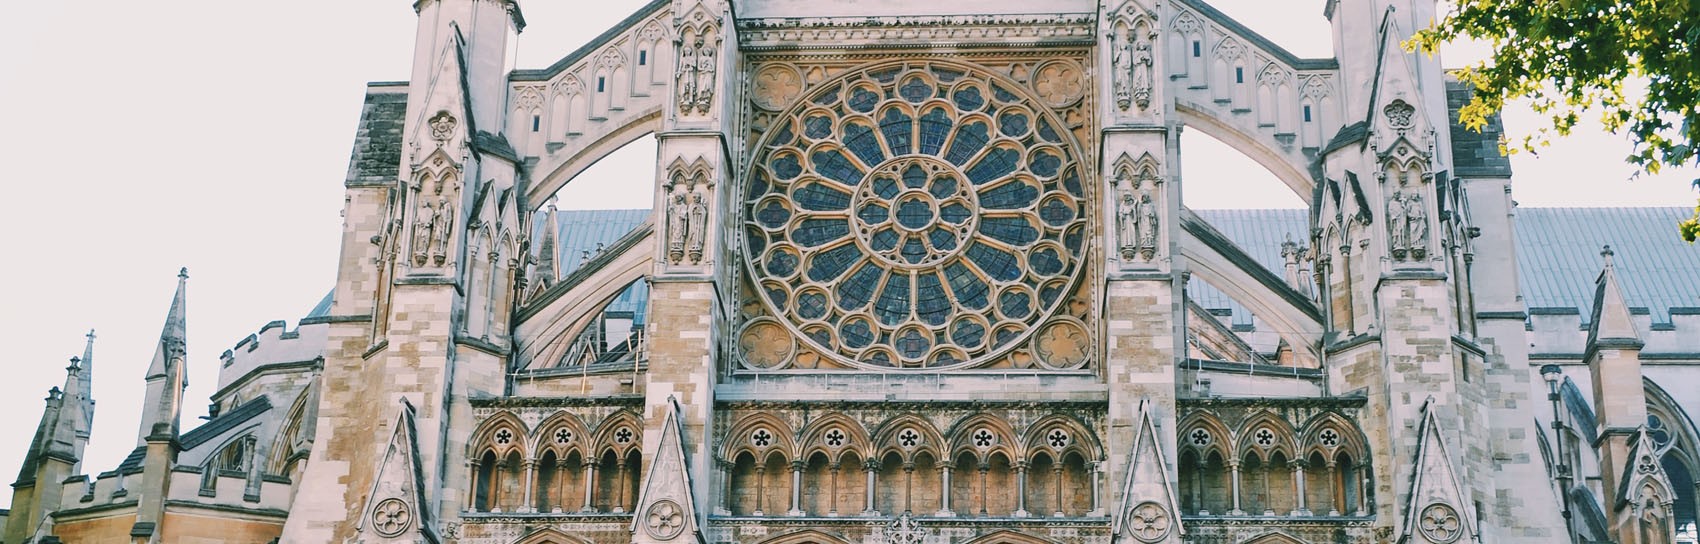 The Rose Window at Westminster Abbey. Photograph by AMY-LEIGH BARNARD